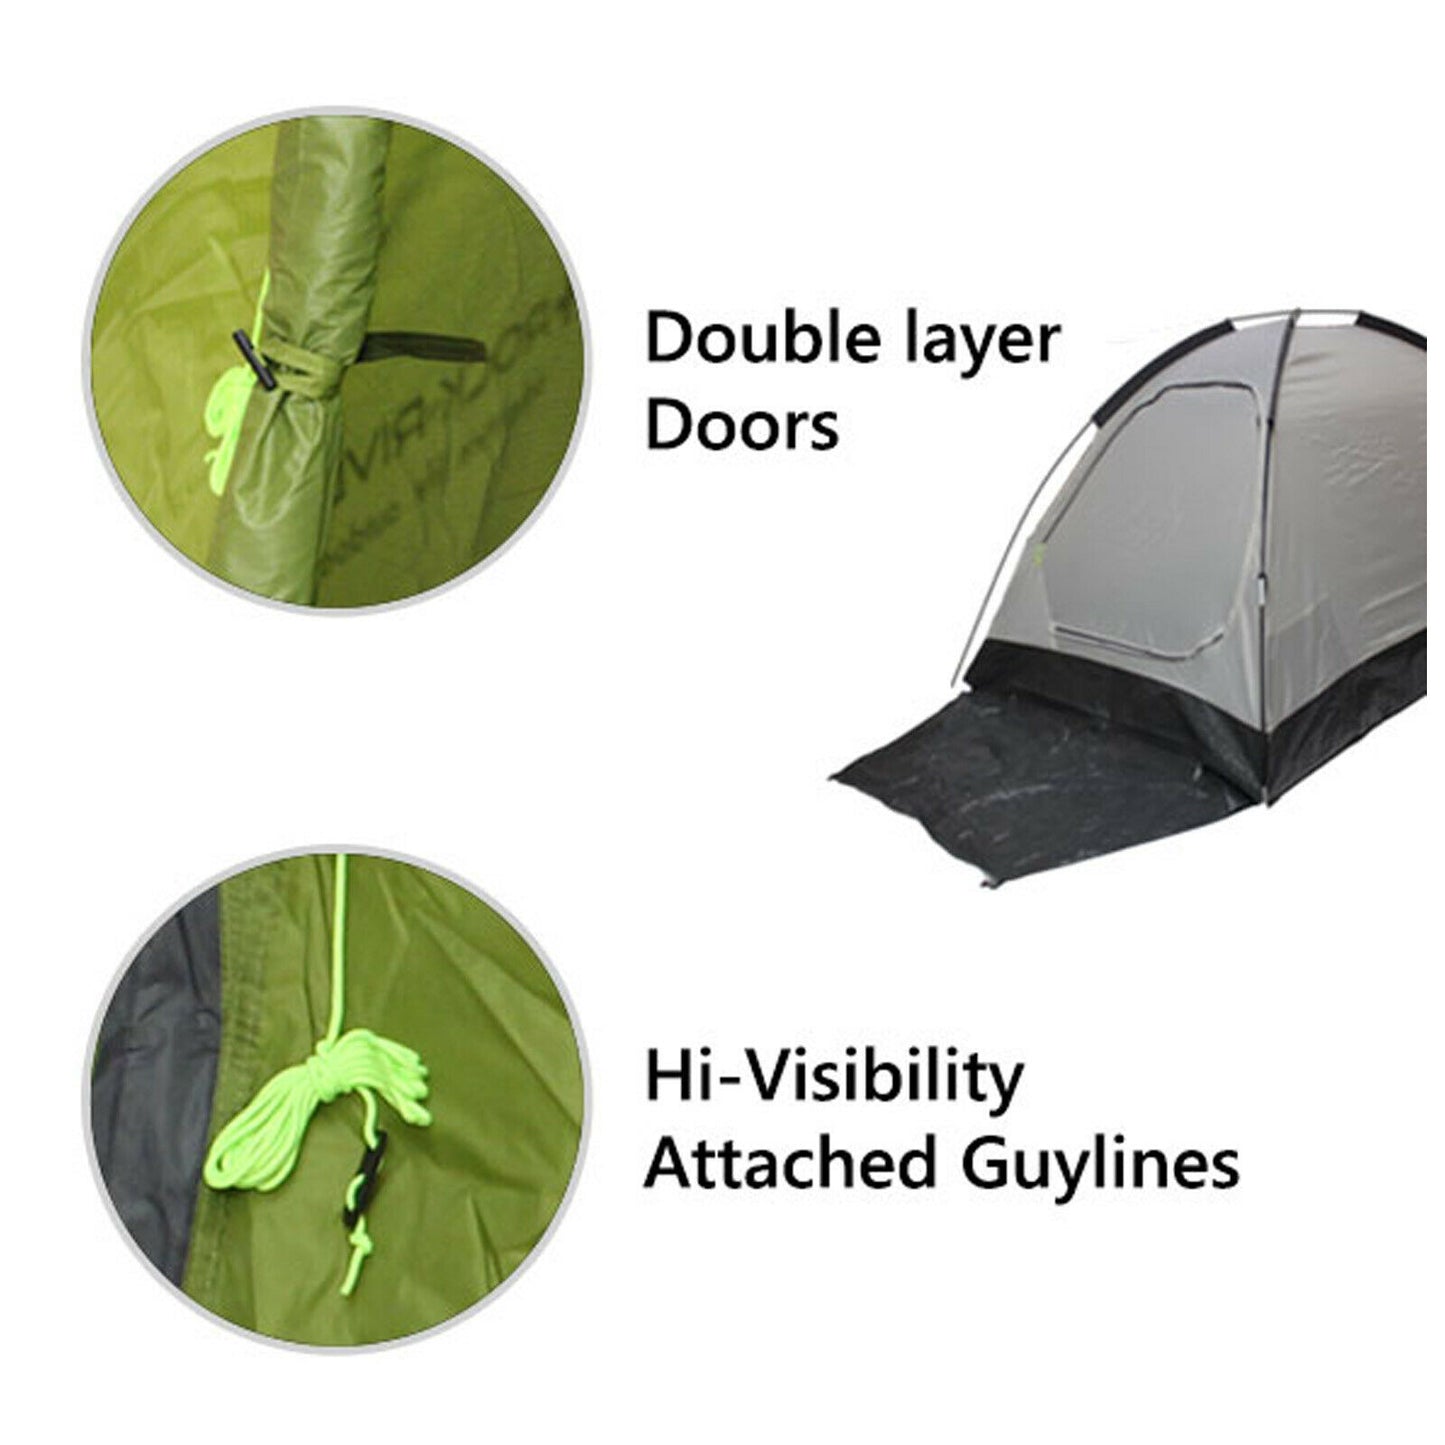 Rock N River 2 Person Inis 200 Dome Waterproof Tent